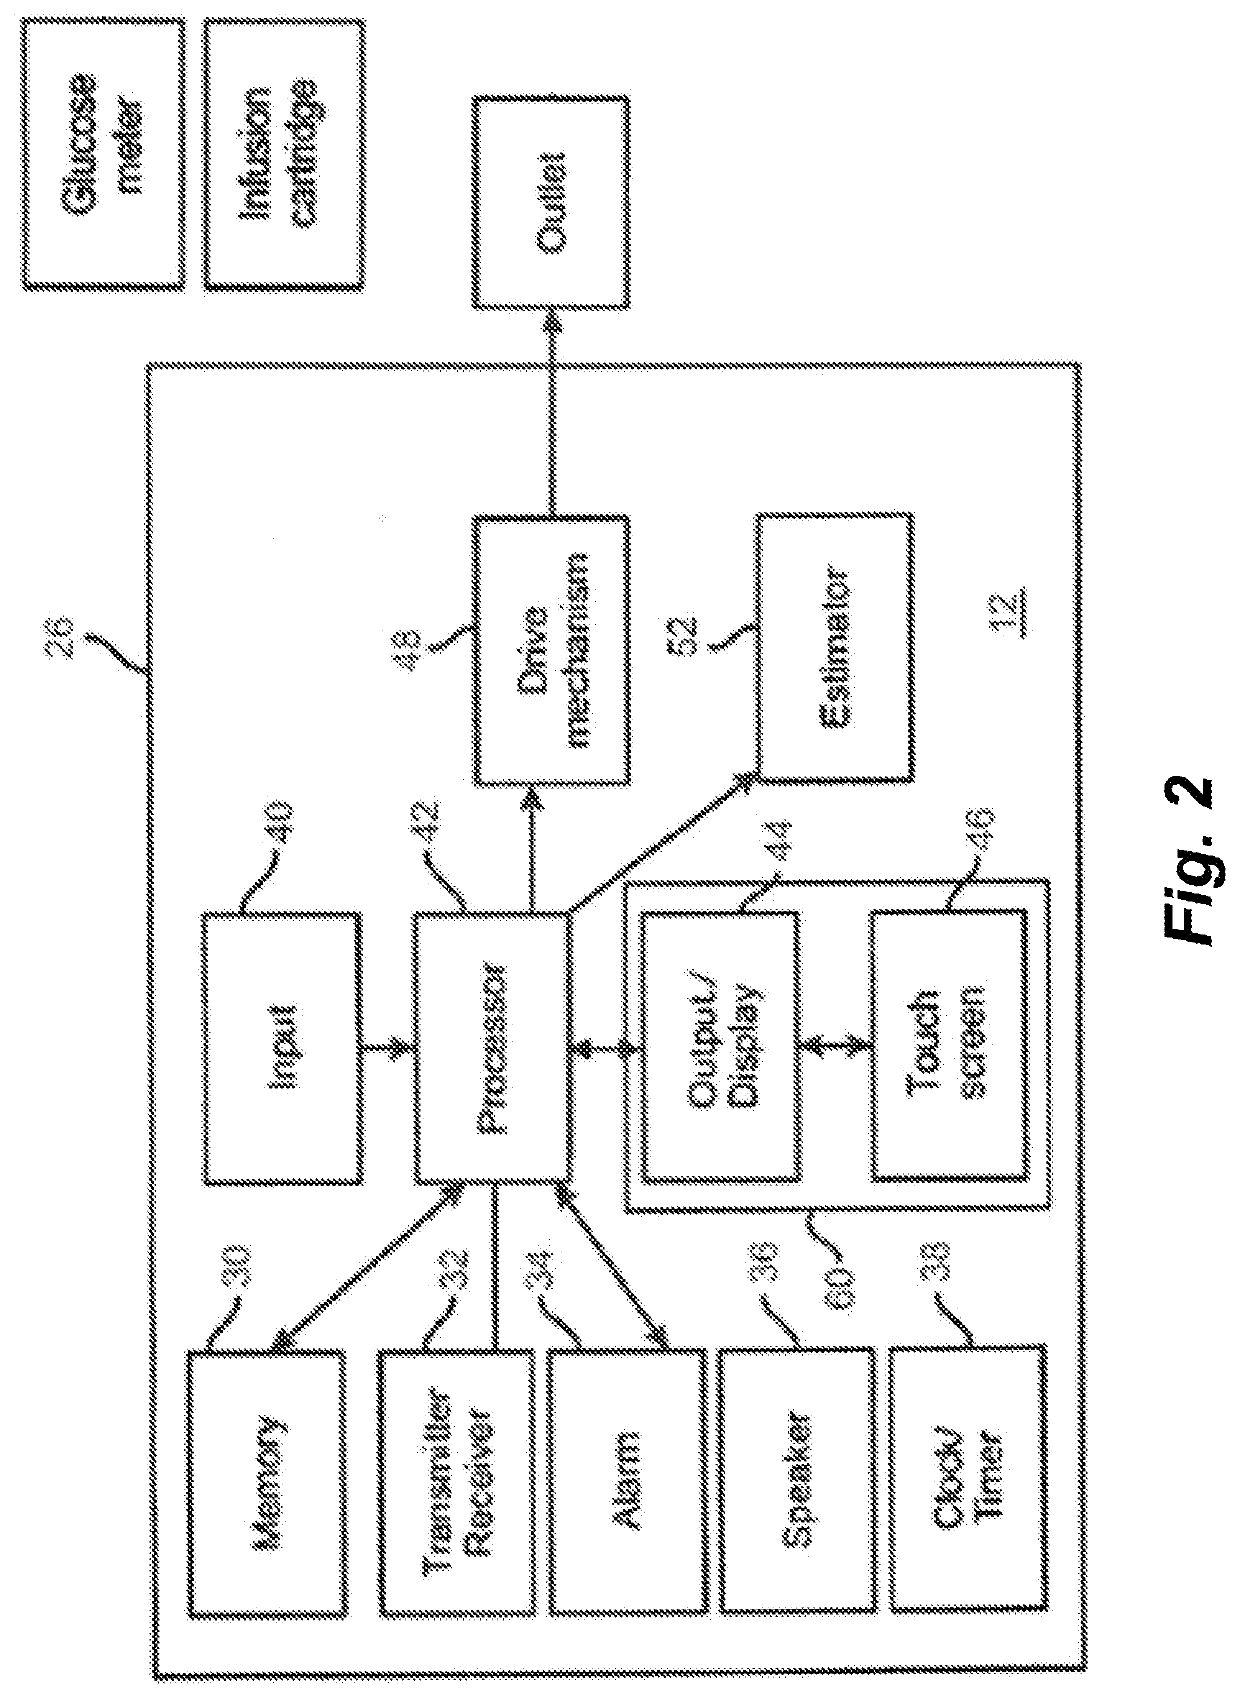 Systems and methods for transitioning to sleep mode in automated insulin delivery